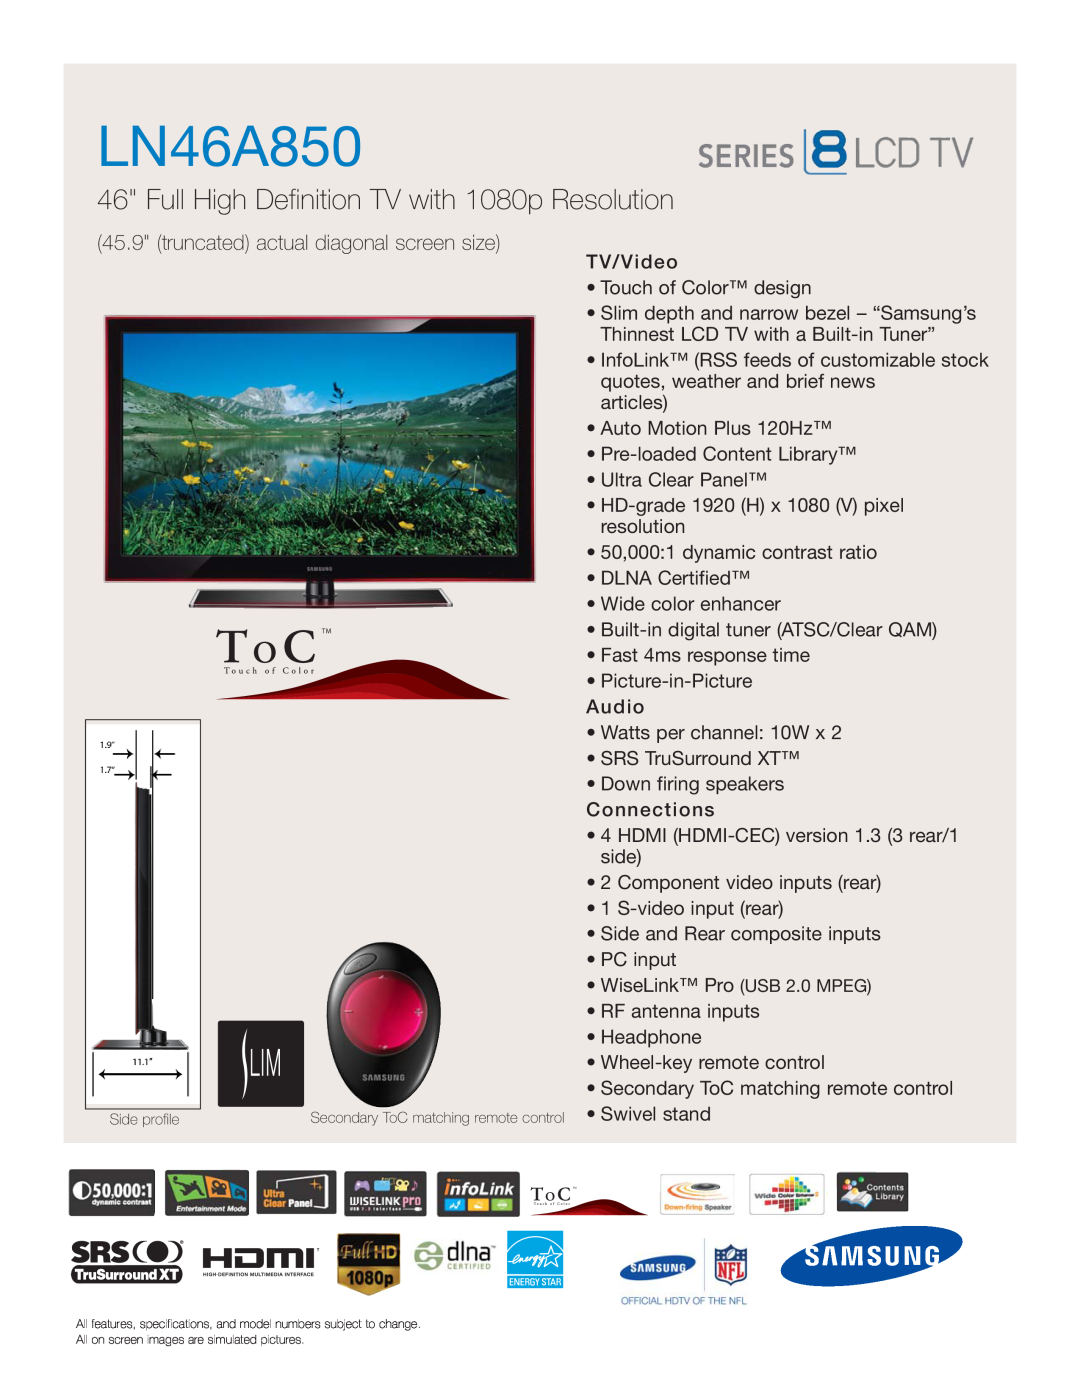 Samsung LN46A850 specifications Full High Definition TV with 1080p Resolution, truncated actual diagonal screen size 